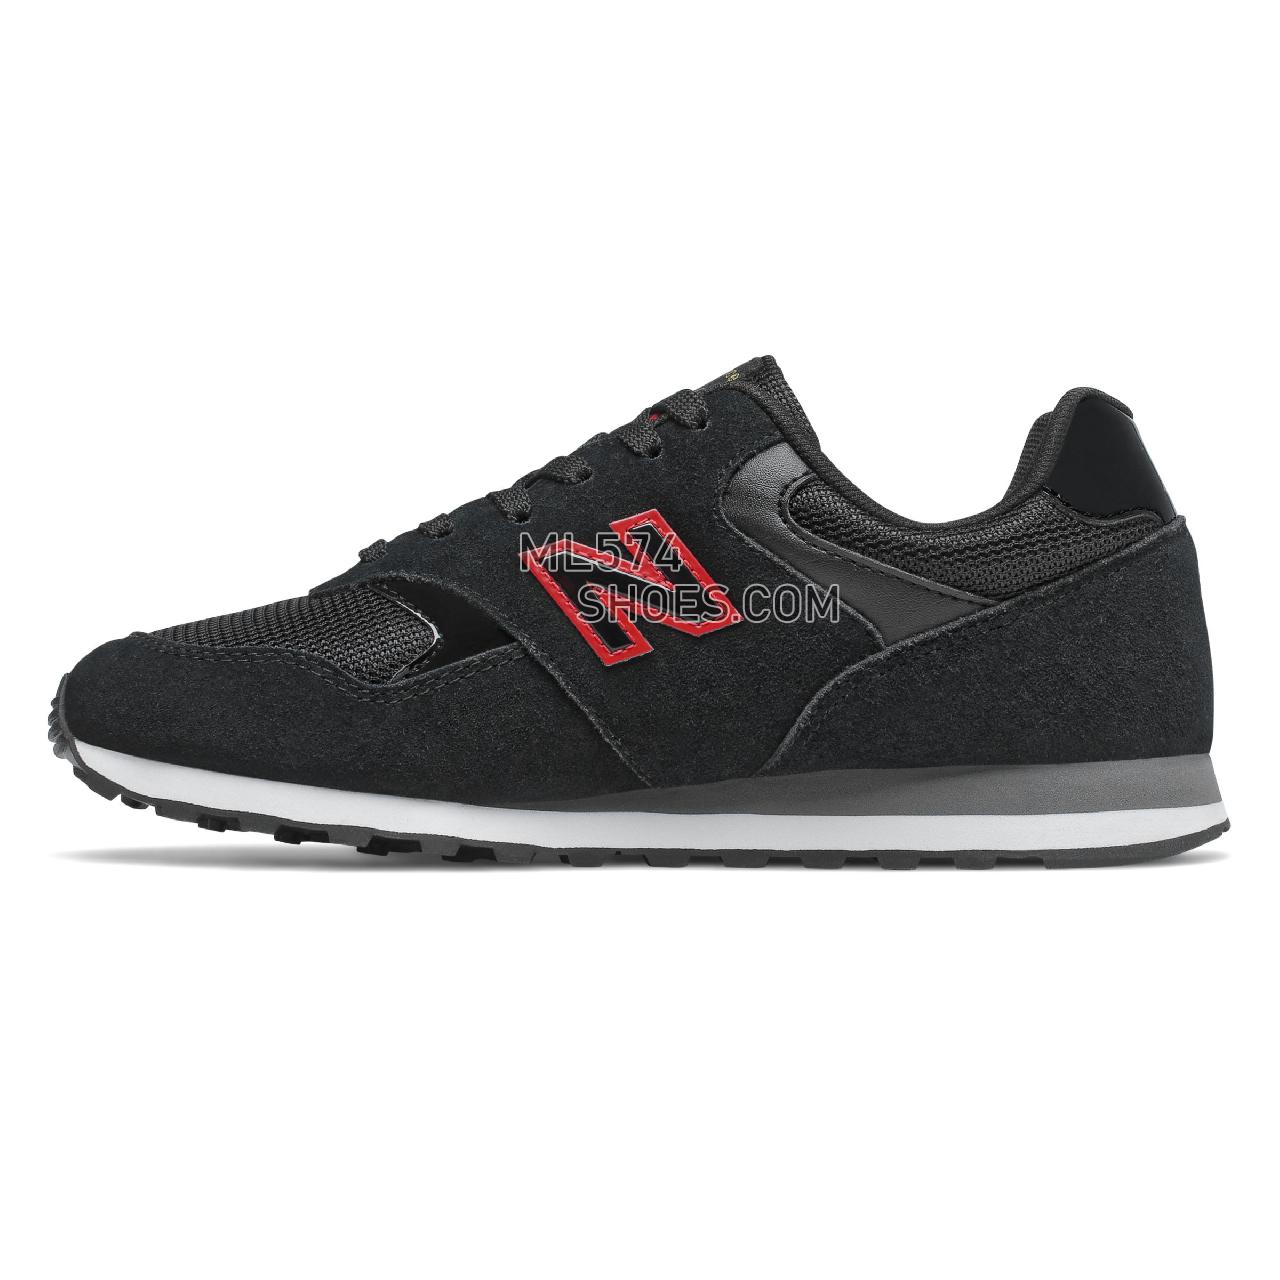 New Balance 393 - Women's Classic Sneakers - Black with Red - WL393MA1